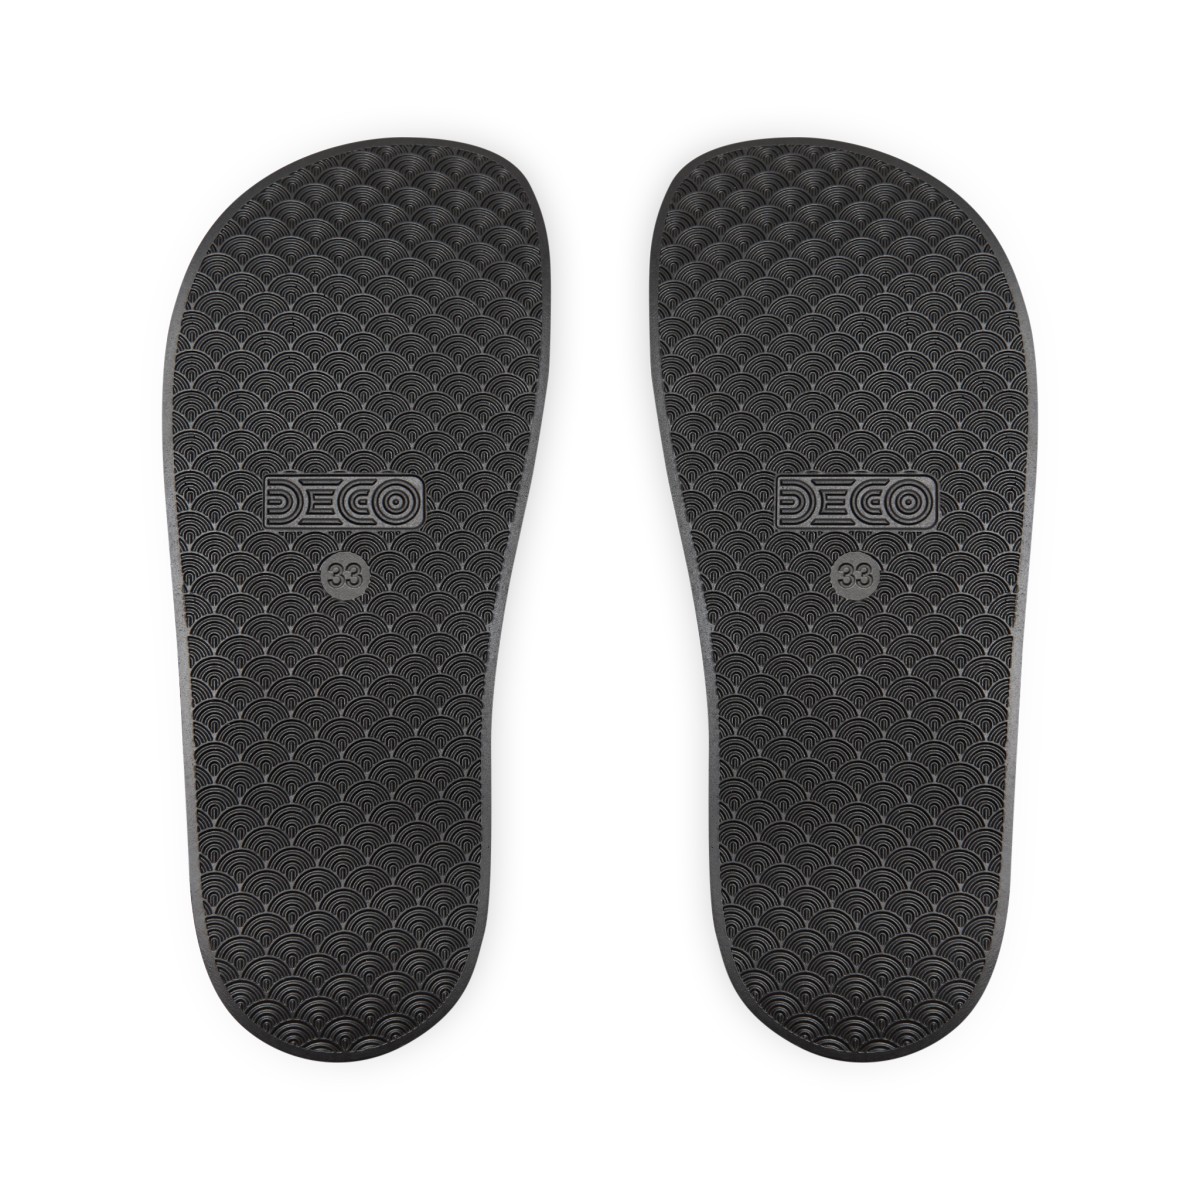 Youth  Slide Sandals product thumbnail image